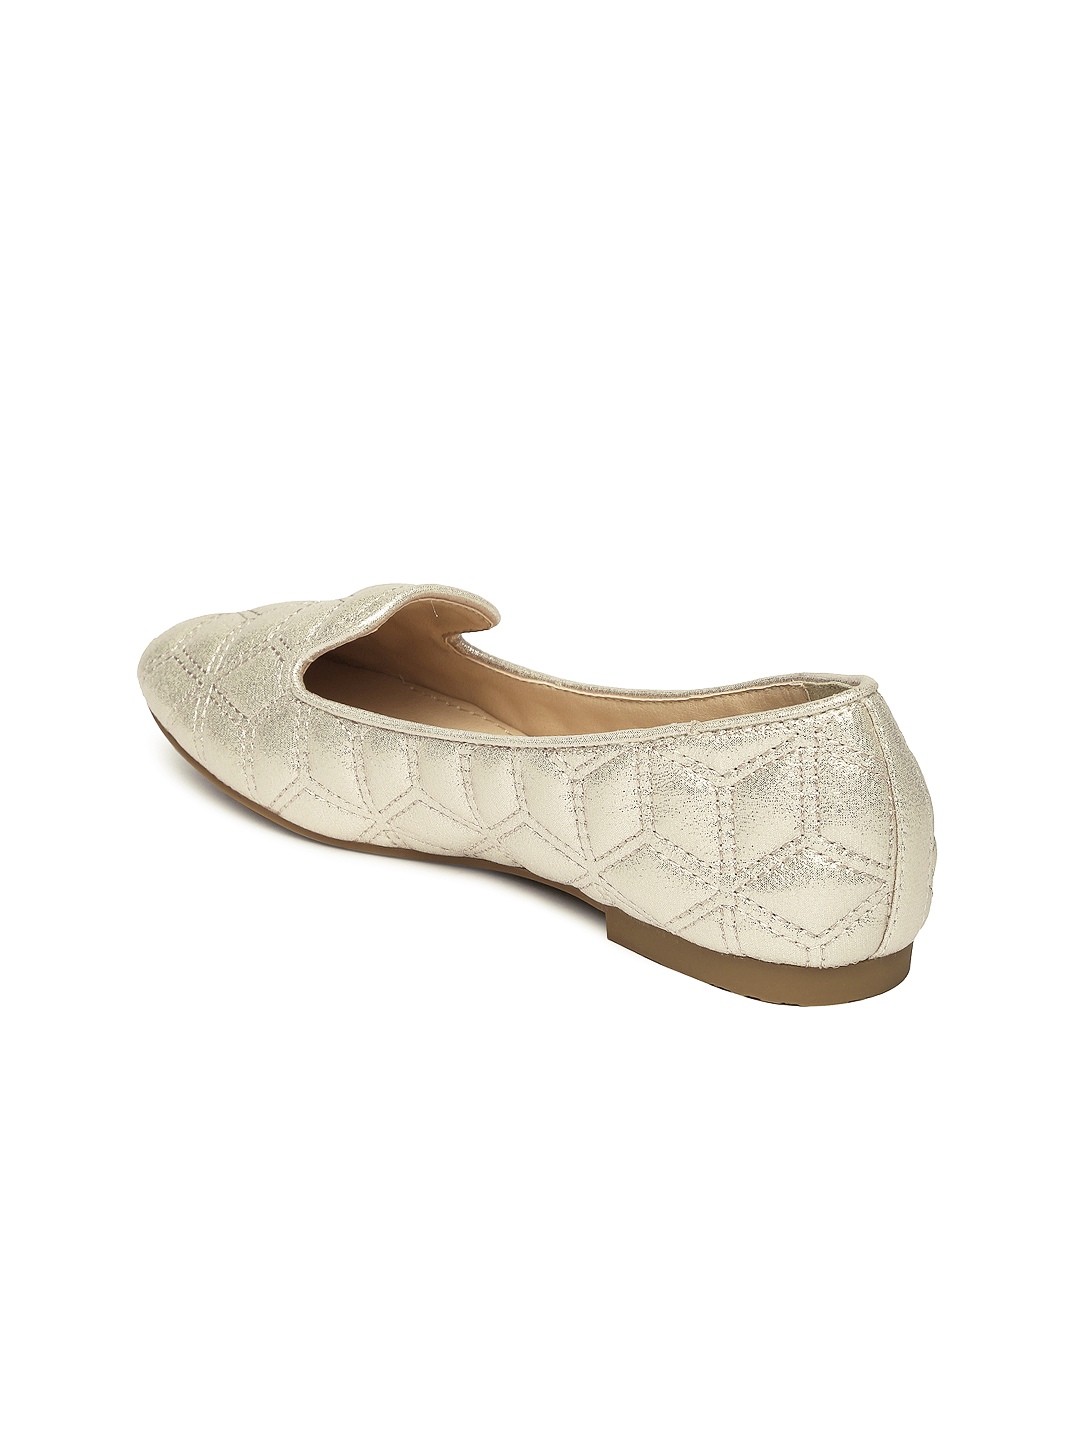 View Product Details More Flats by Tresmode More Gold Flats More Flats